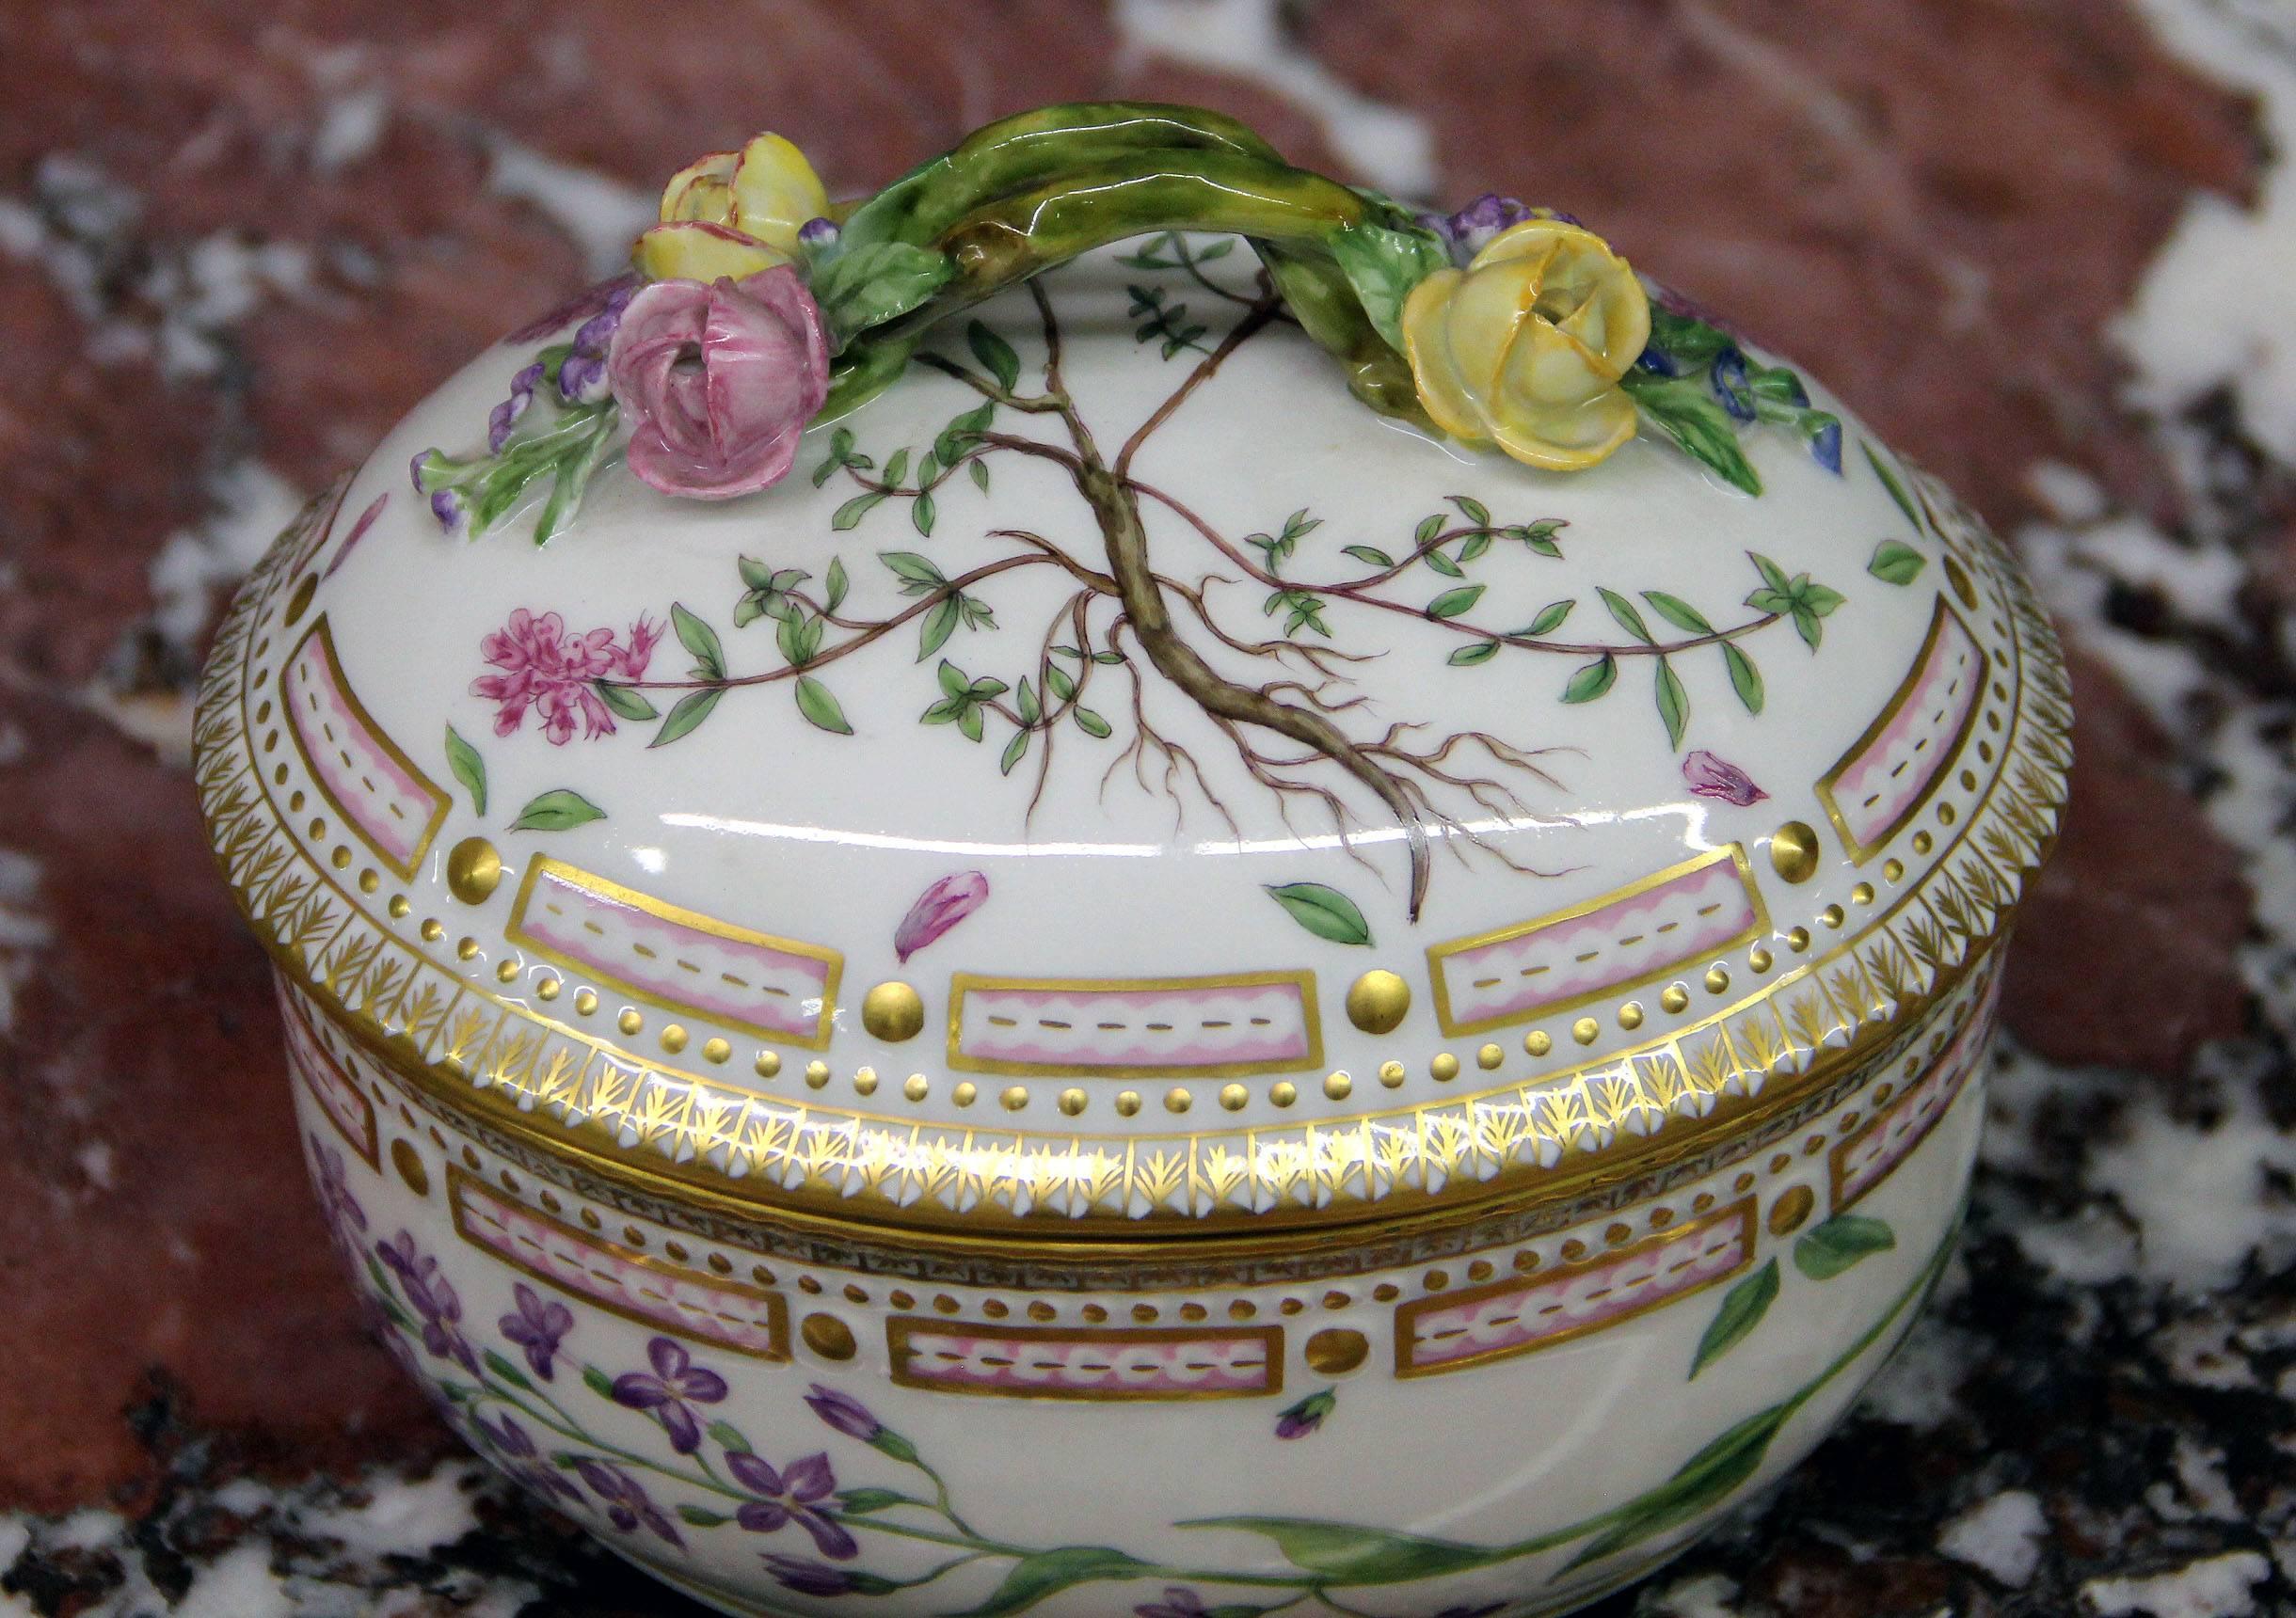 A 20th century Flora Danica large sugar bowl with cover.

Finely decorated with gold accent designs, raised porcelain flowers and handle, and 